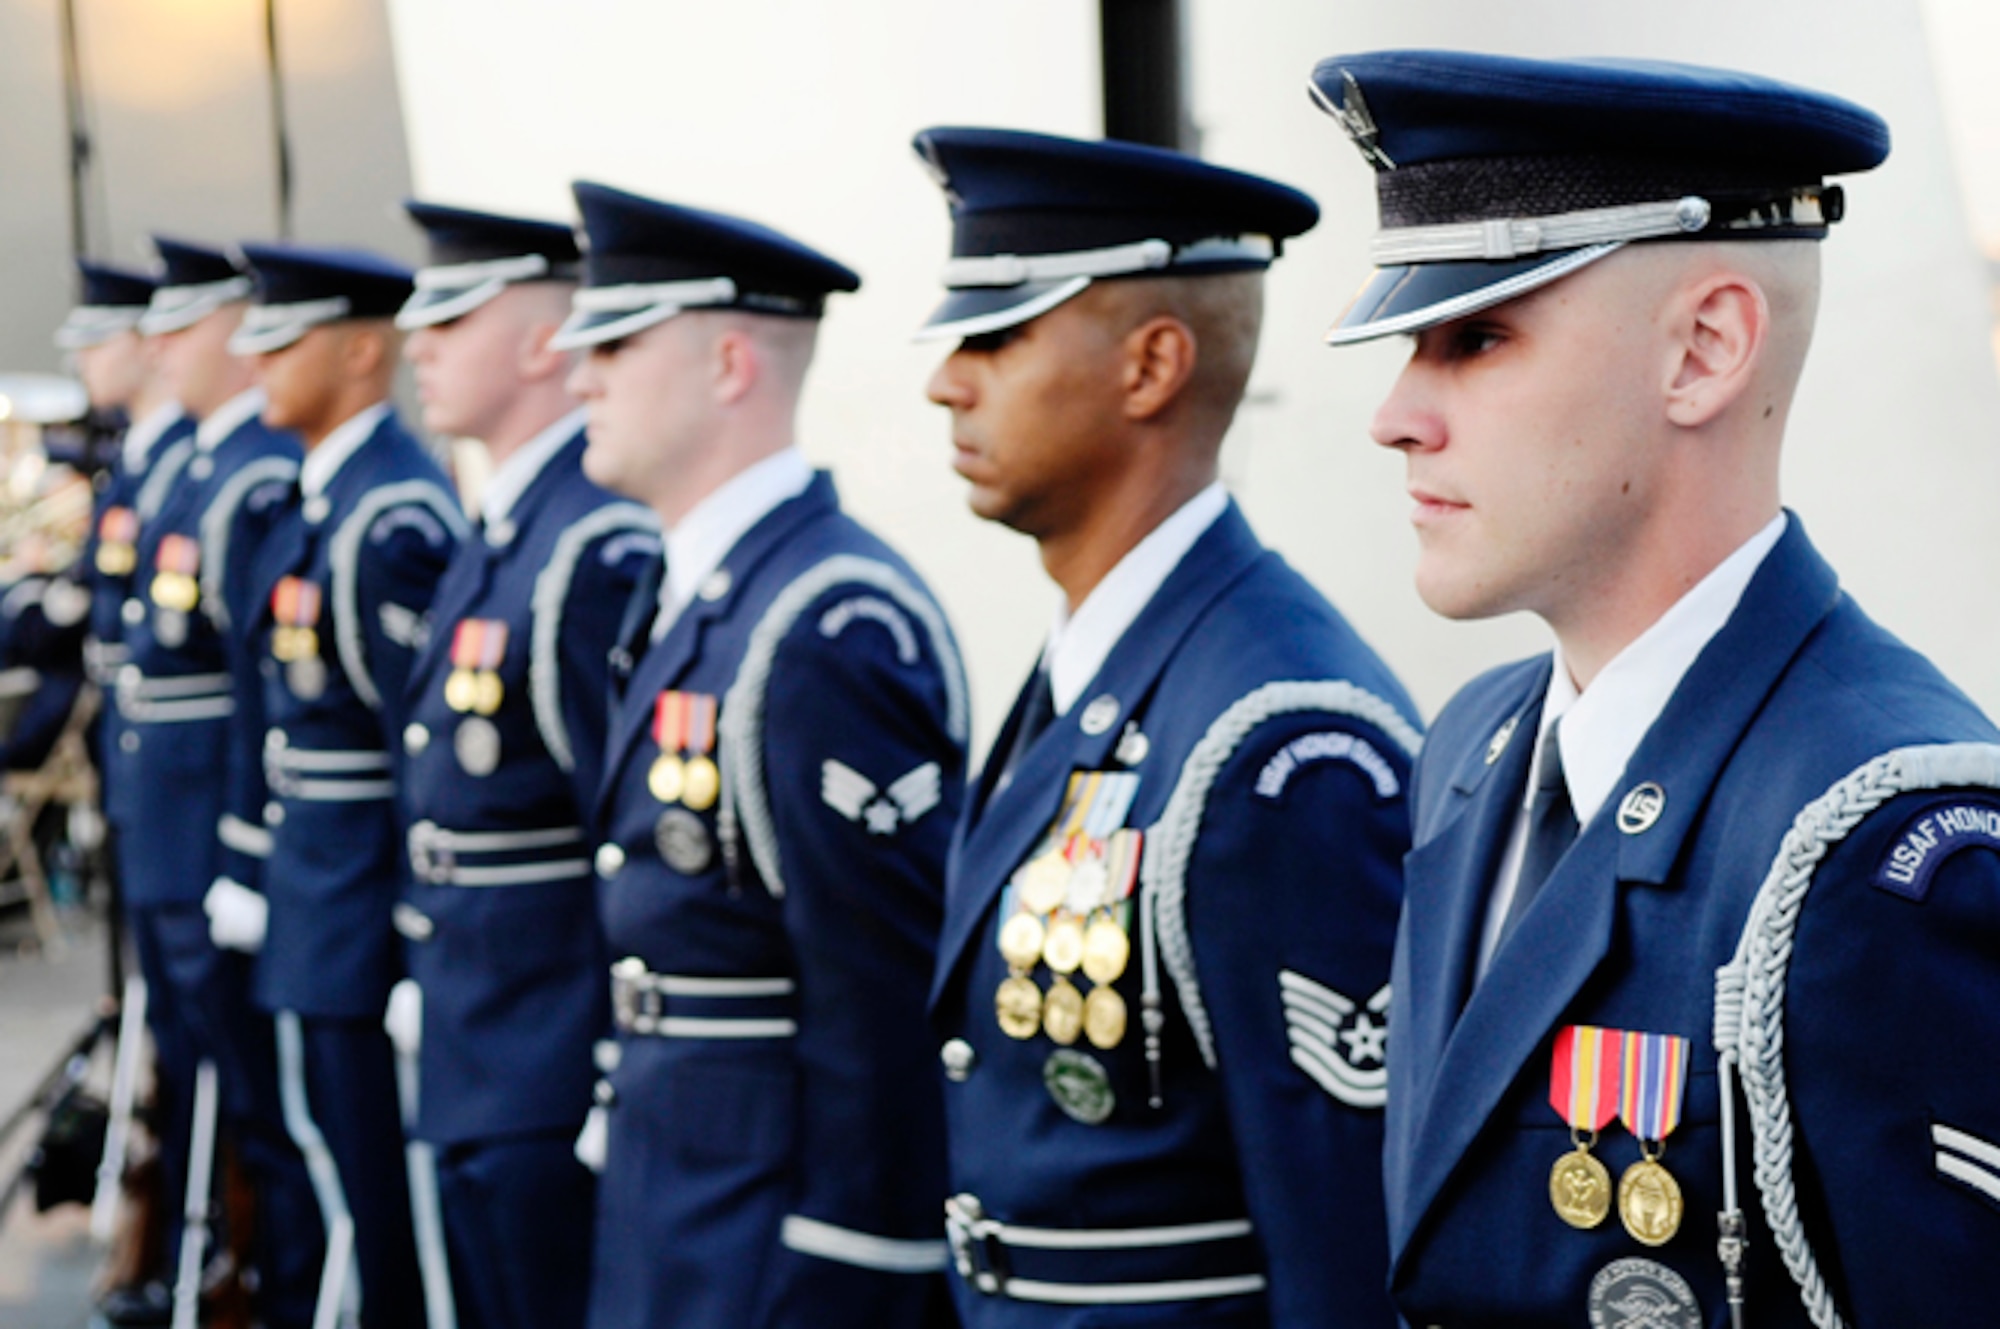 Ceremonial Guardsmen from the U.S. Air Force Honor Guard represent deployed Airmen around the globe during the June 4, opening of the U.S. Air Force Band’s Summer Concert Series at the Air Force Memorial, Arlington, Va. The summer concert series is an annual event demonstrating the talent and capabilities of the USAF Band. The summer concert series is held at various locations throughout the National Capital Region and is free to the public. (U.S. Air Force photo by Staff Sgt. Raymond Mills)